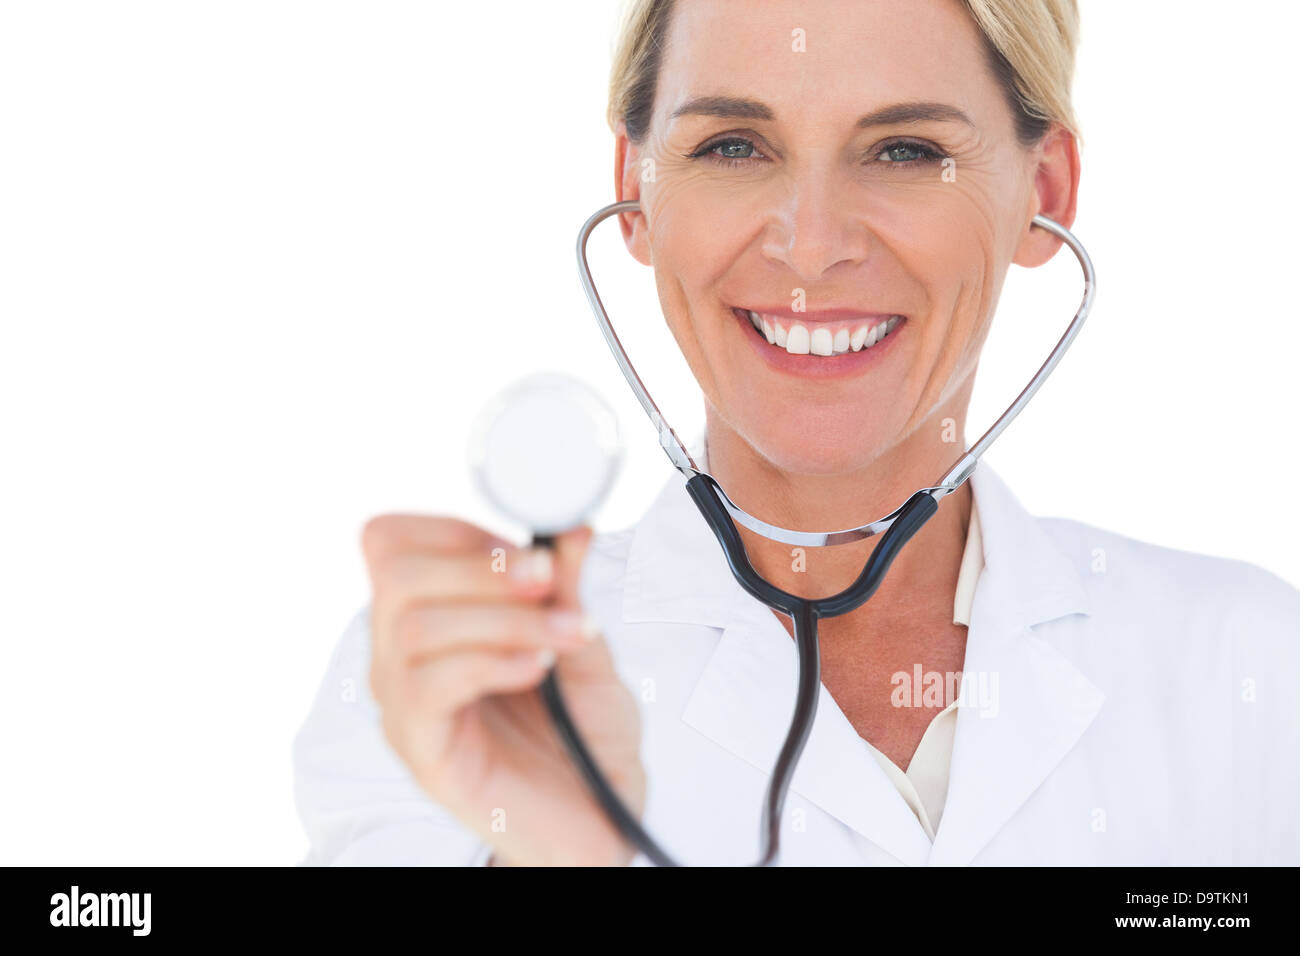 Happy doctor with stethoscope Banque D'Images